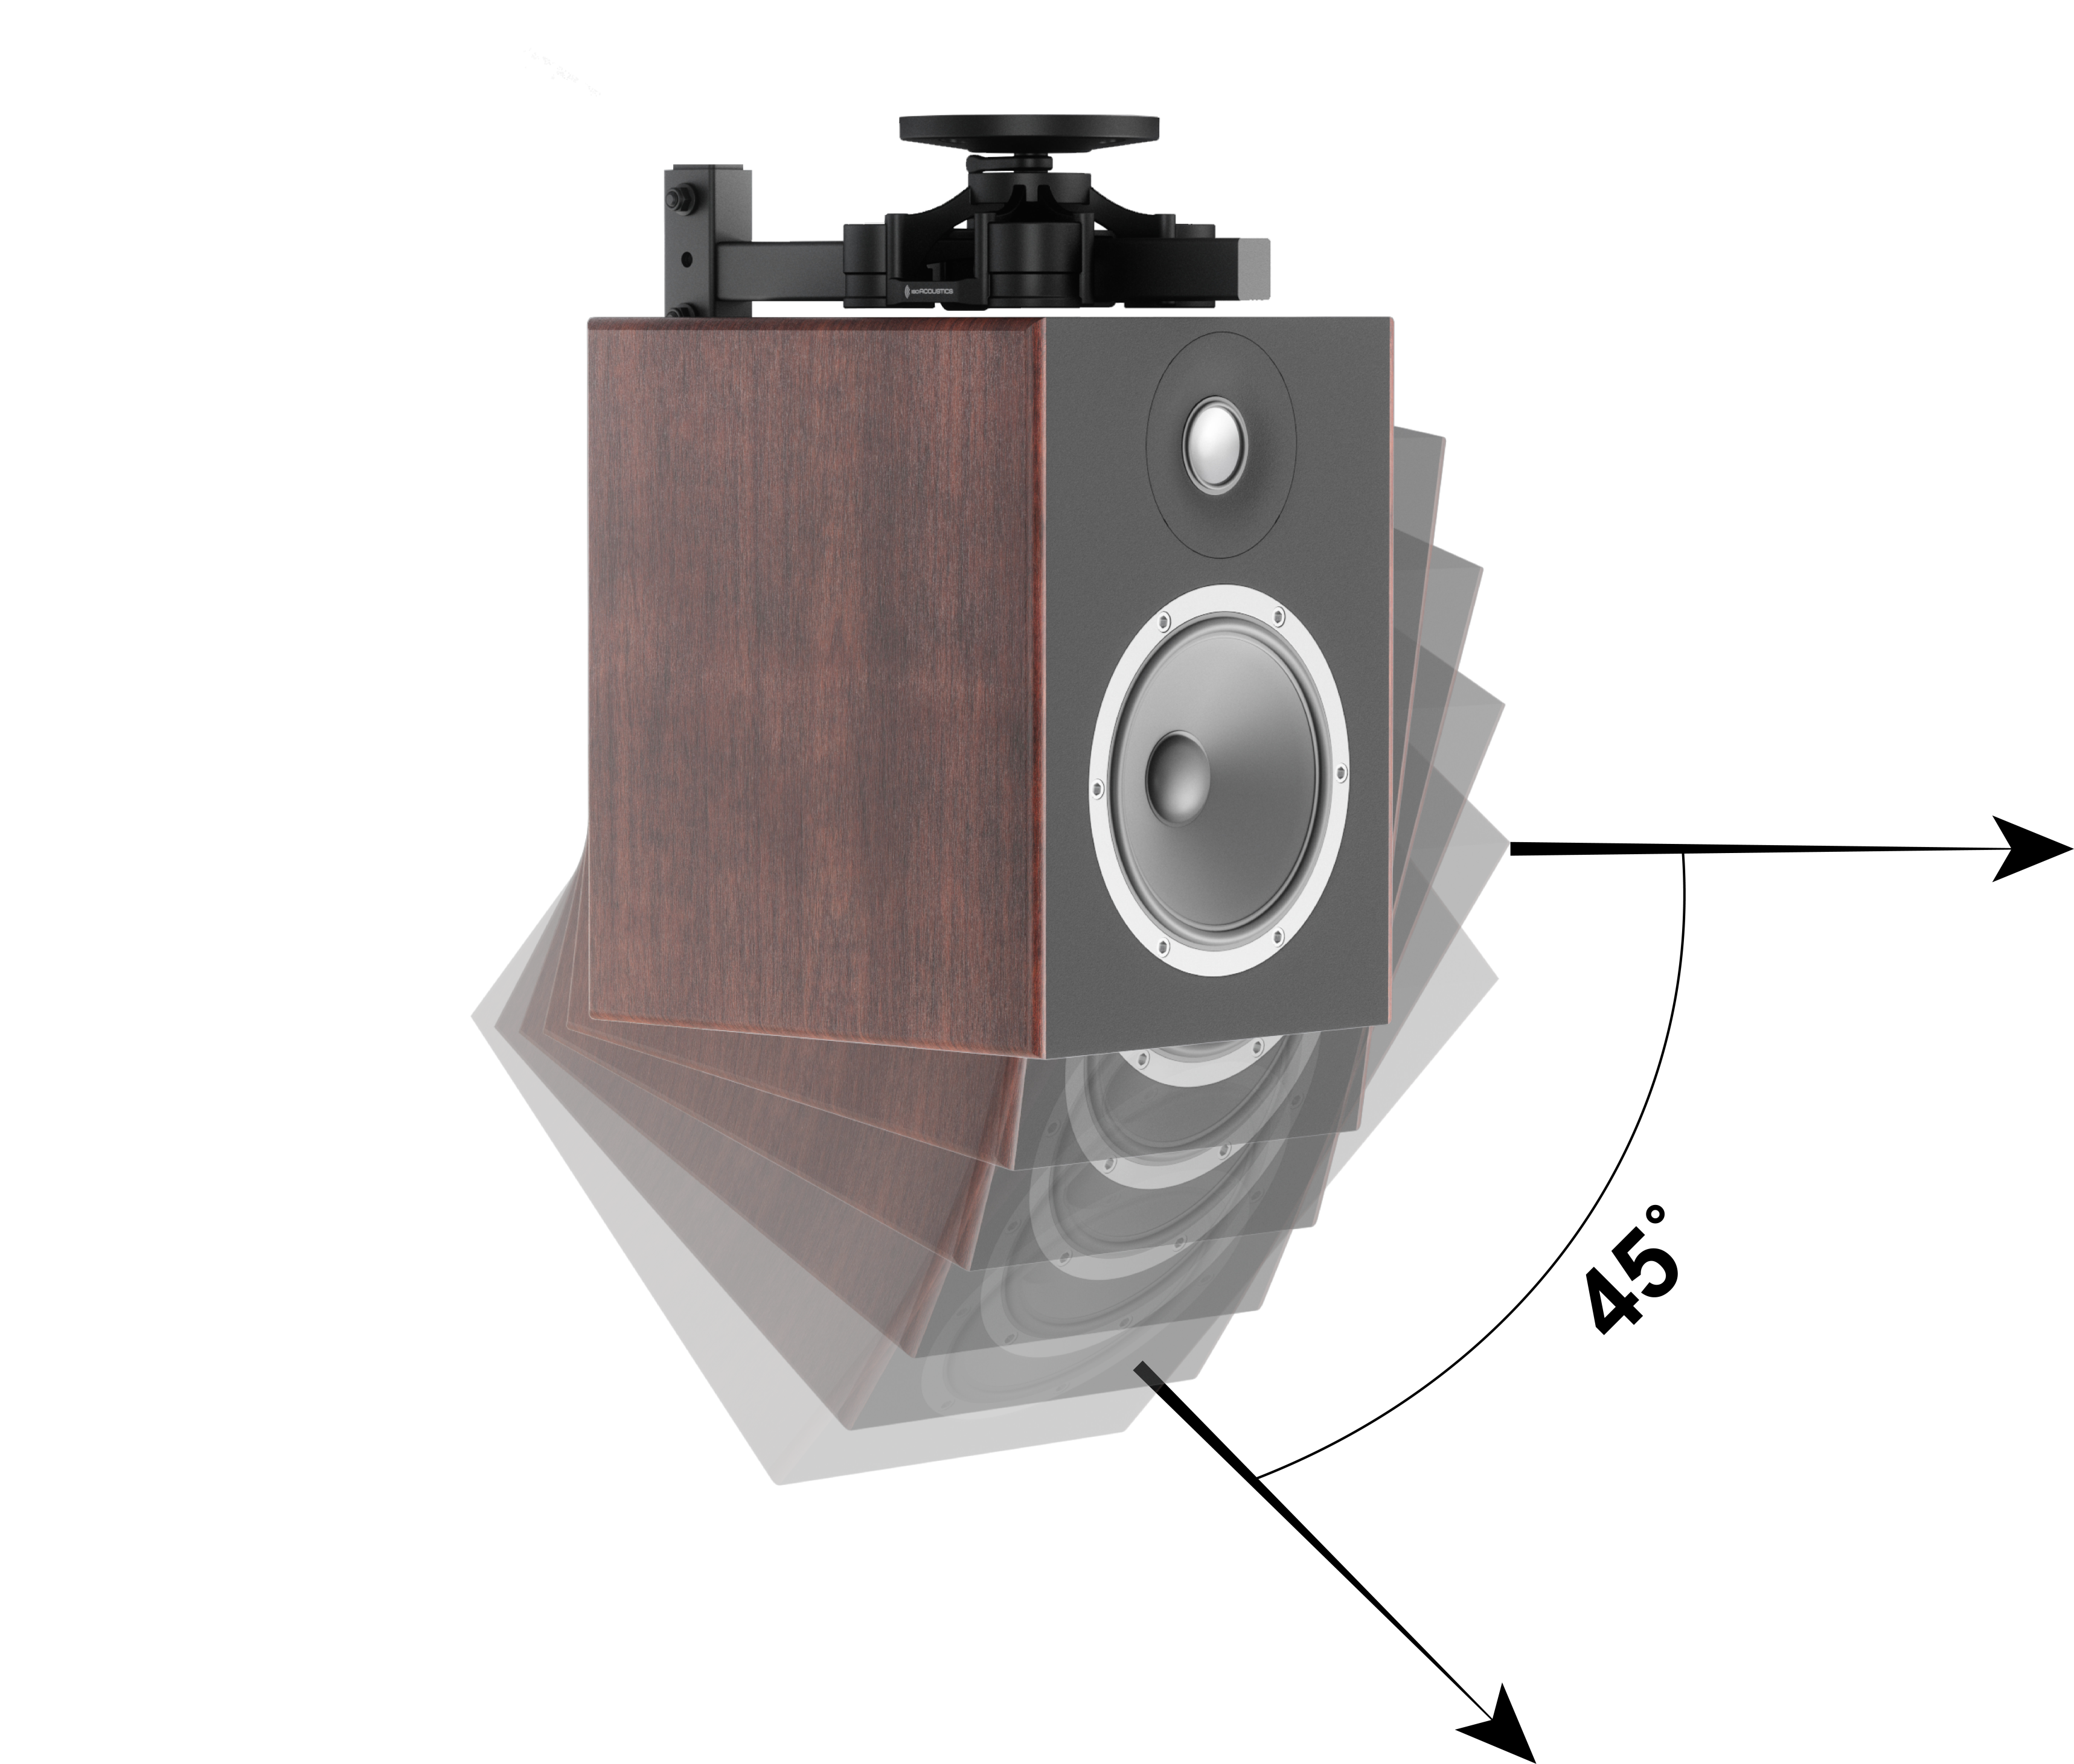 IsoAcoustics | V120	Mount to isolate height speakers for immersive audio